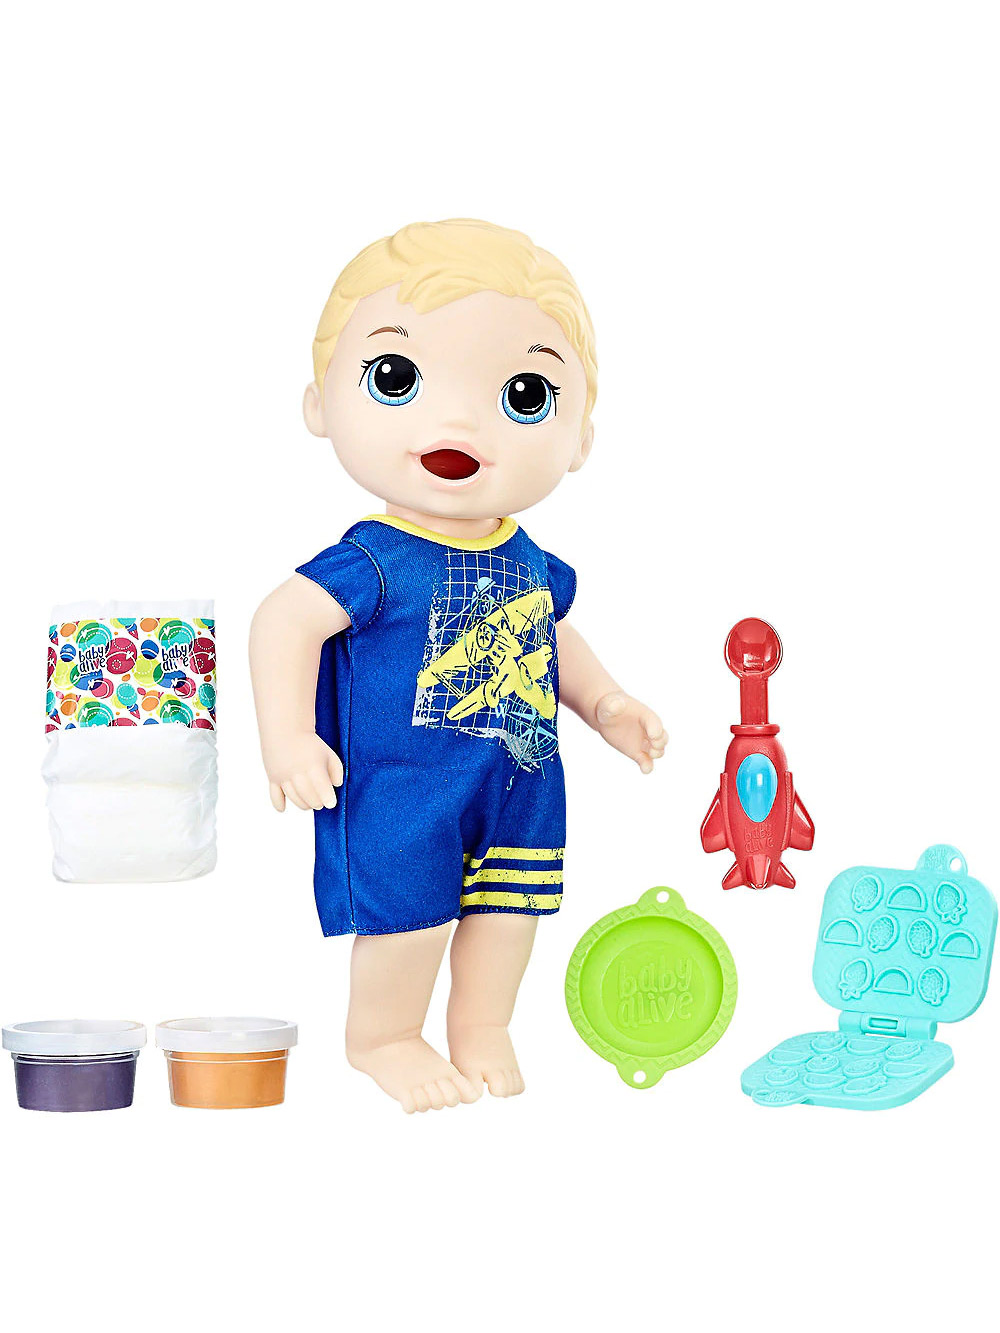 male baby alive doll